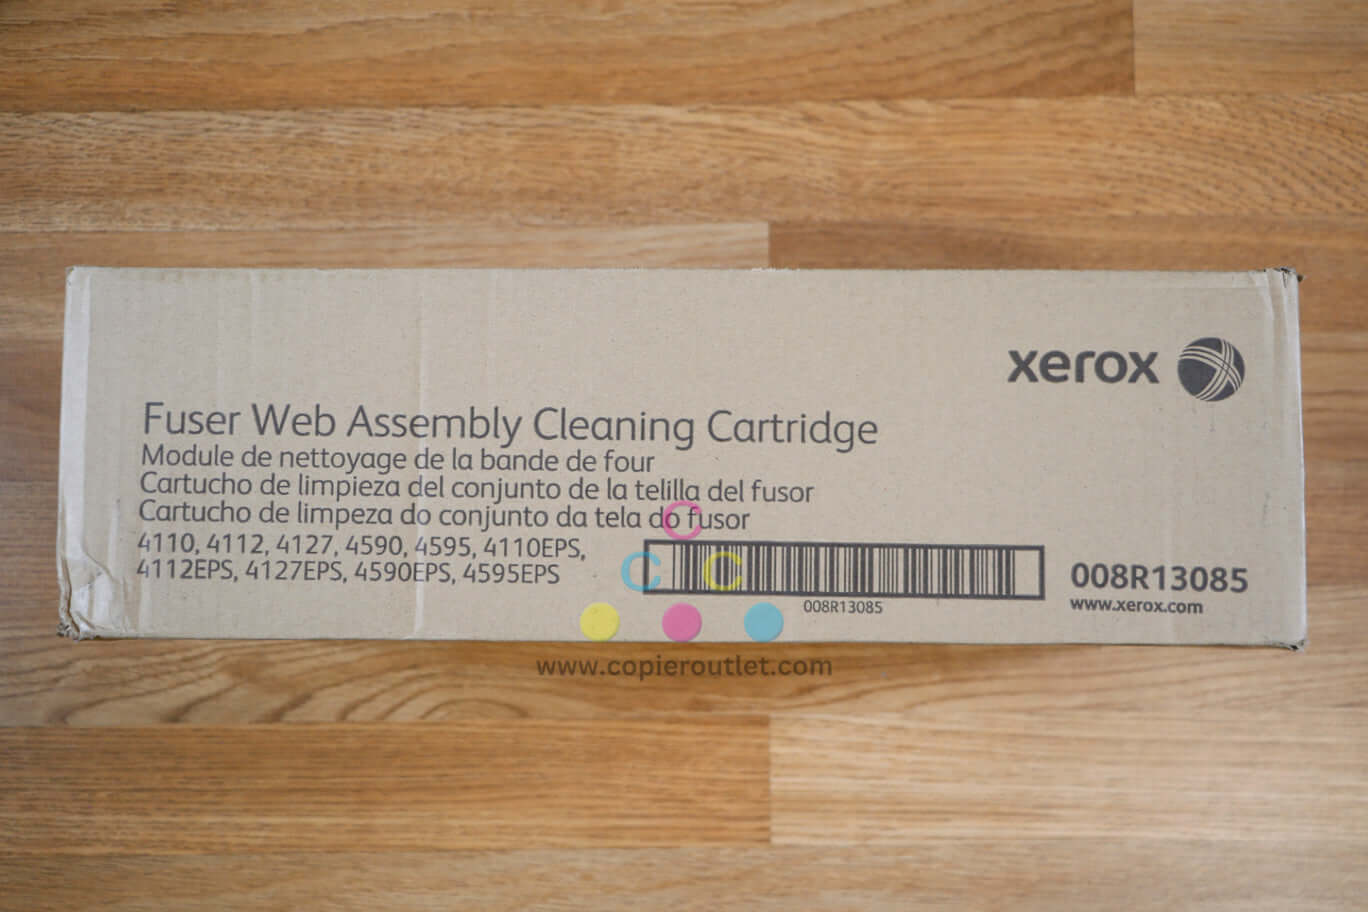 Genuine Xerox 008R13085 Fuser Web Cleaning Cart. 4110/4595EPS Same Day Shipping!